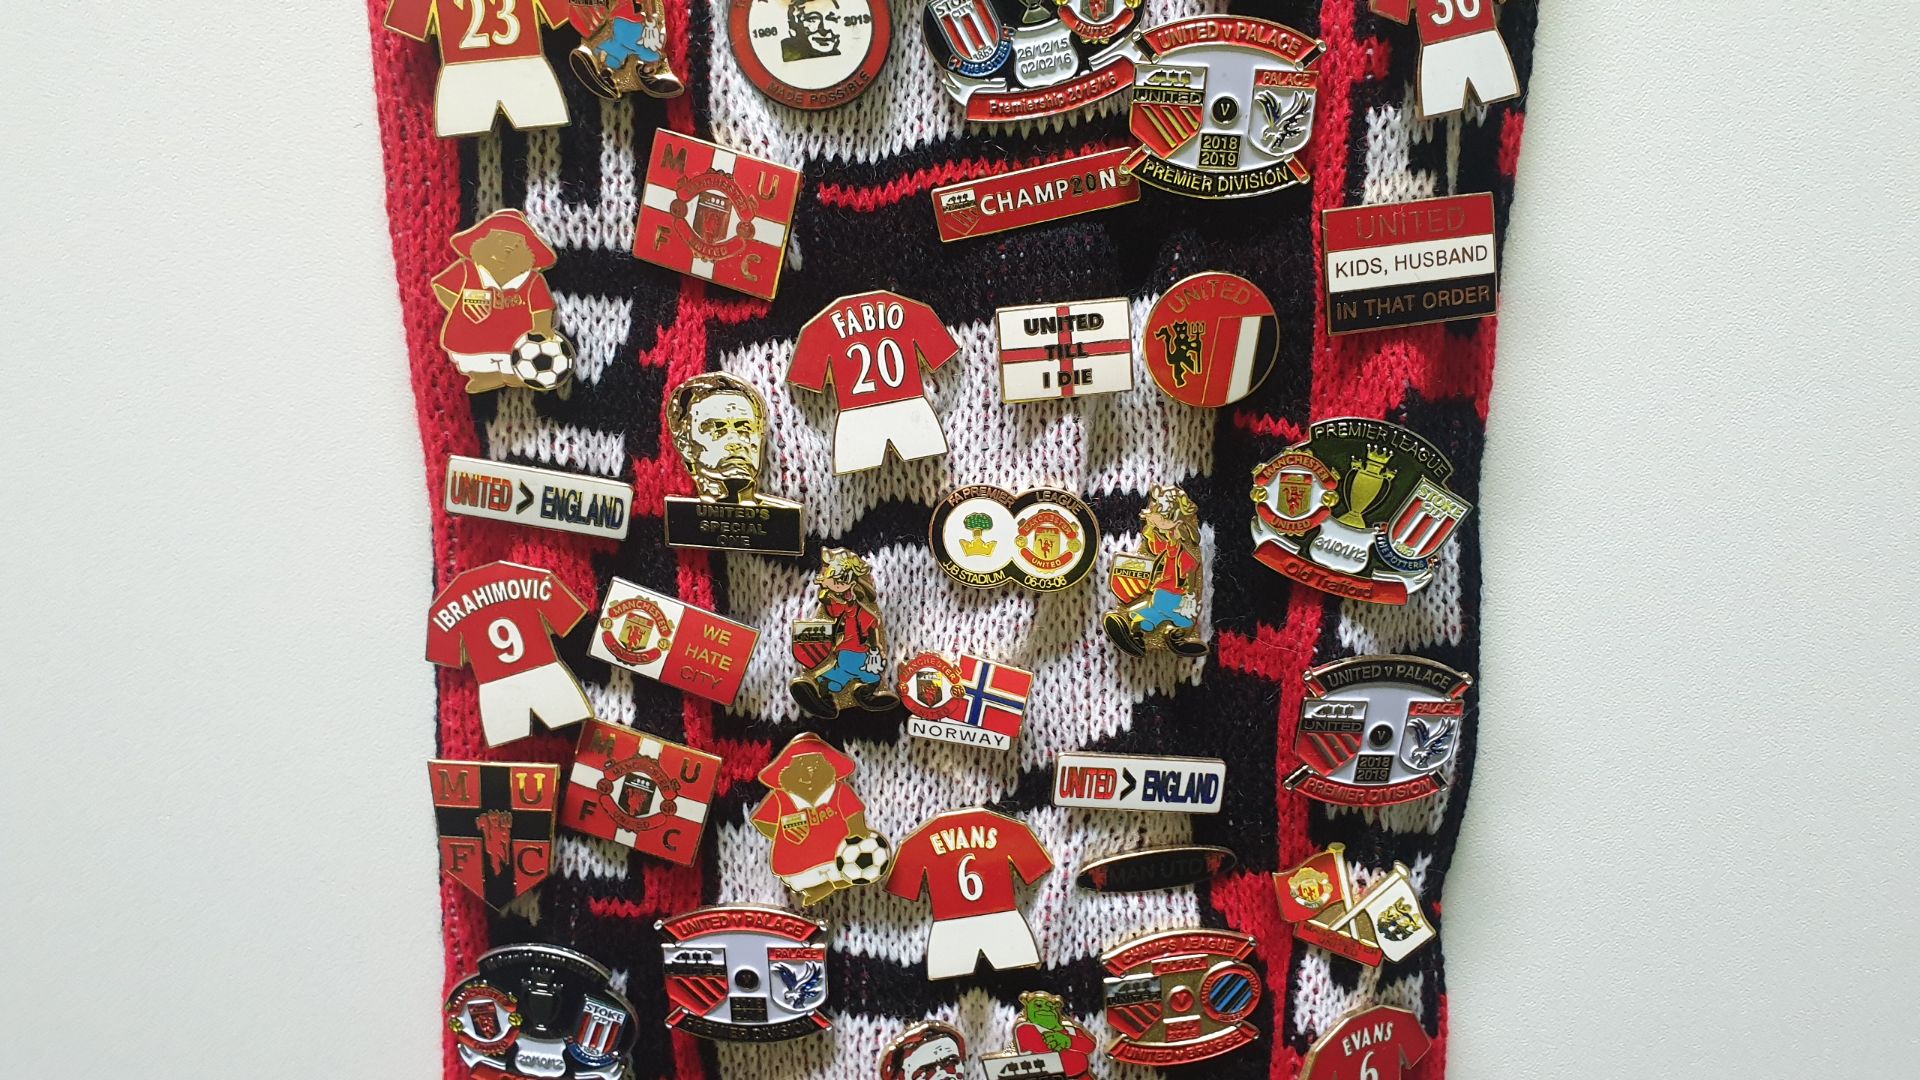 MANCHESTER UNITED SCARF CONTAINING APPROX 260 X PIN BADGES IE FA CUP WINNER 2018, WE HATE CITY, - Image 7 of 8